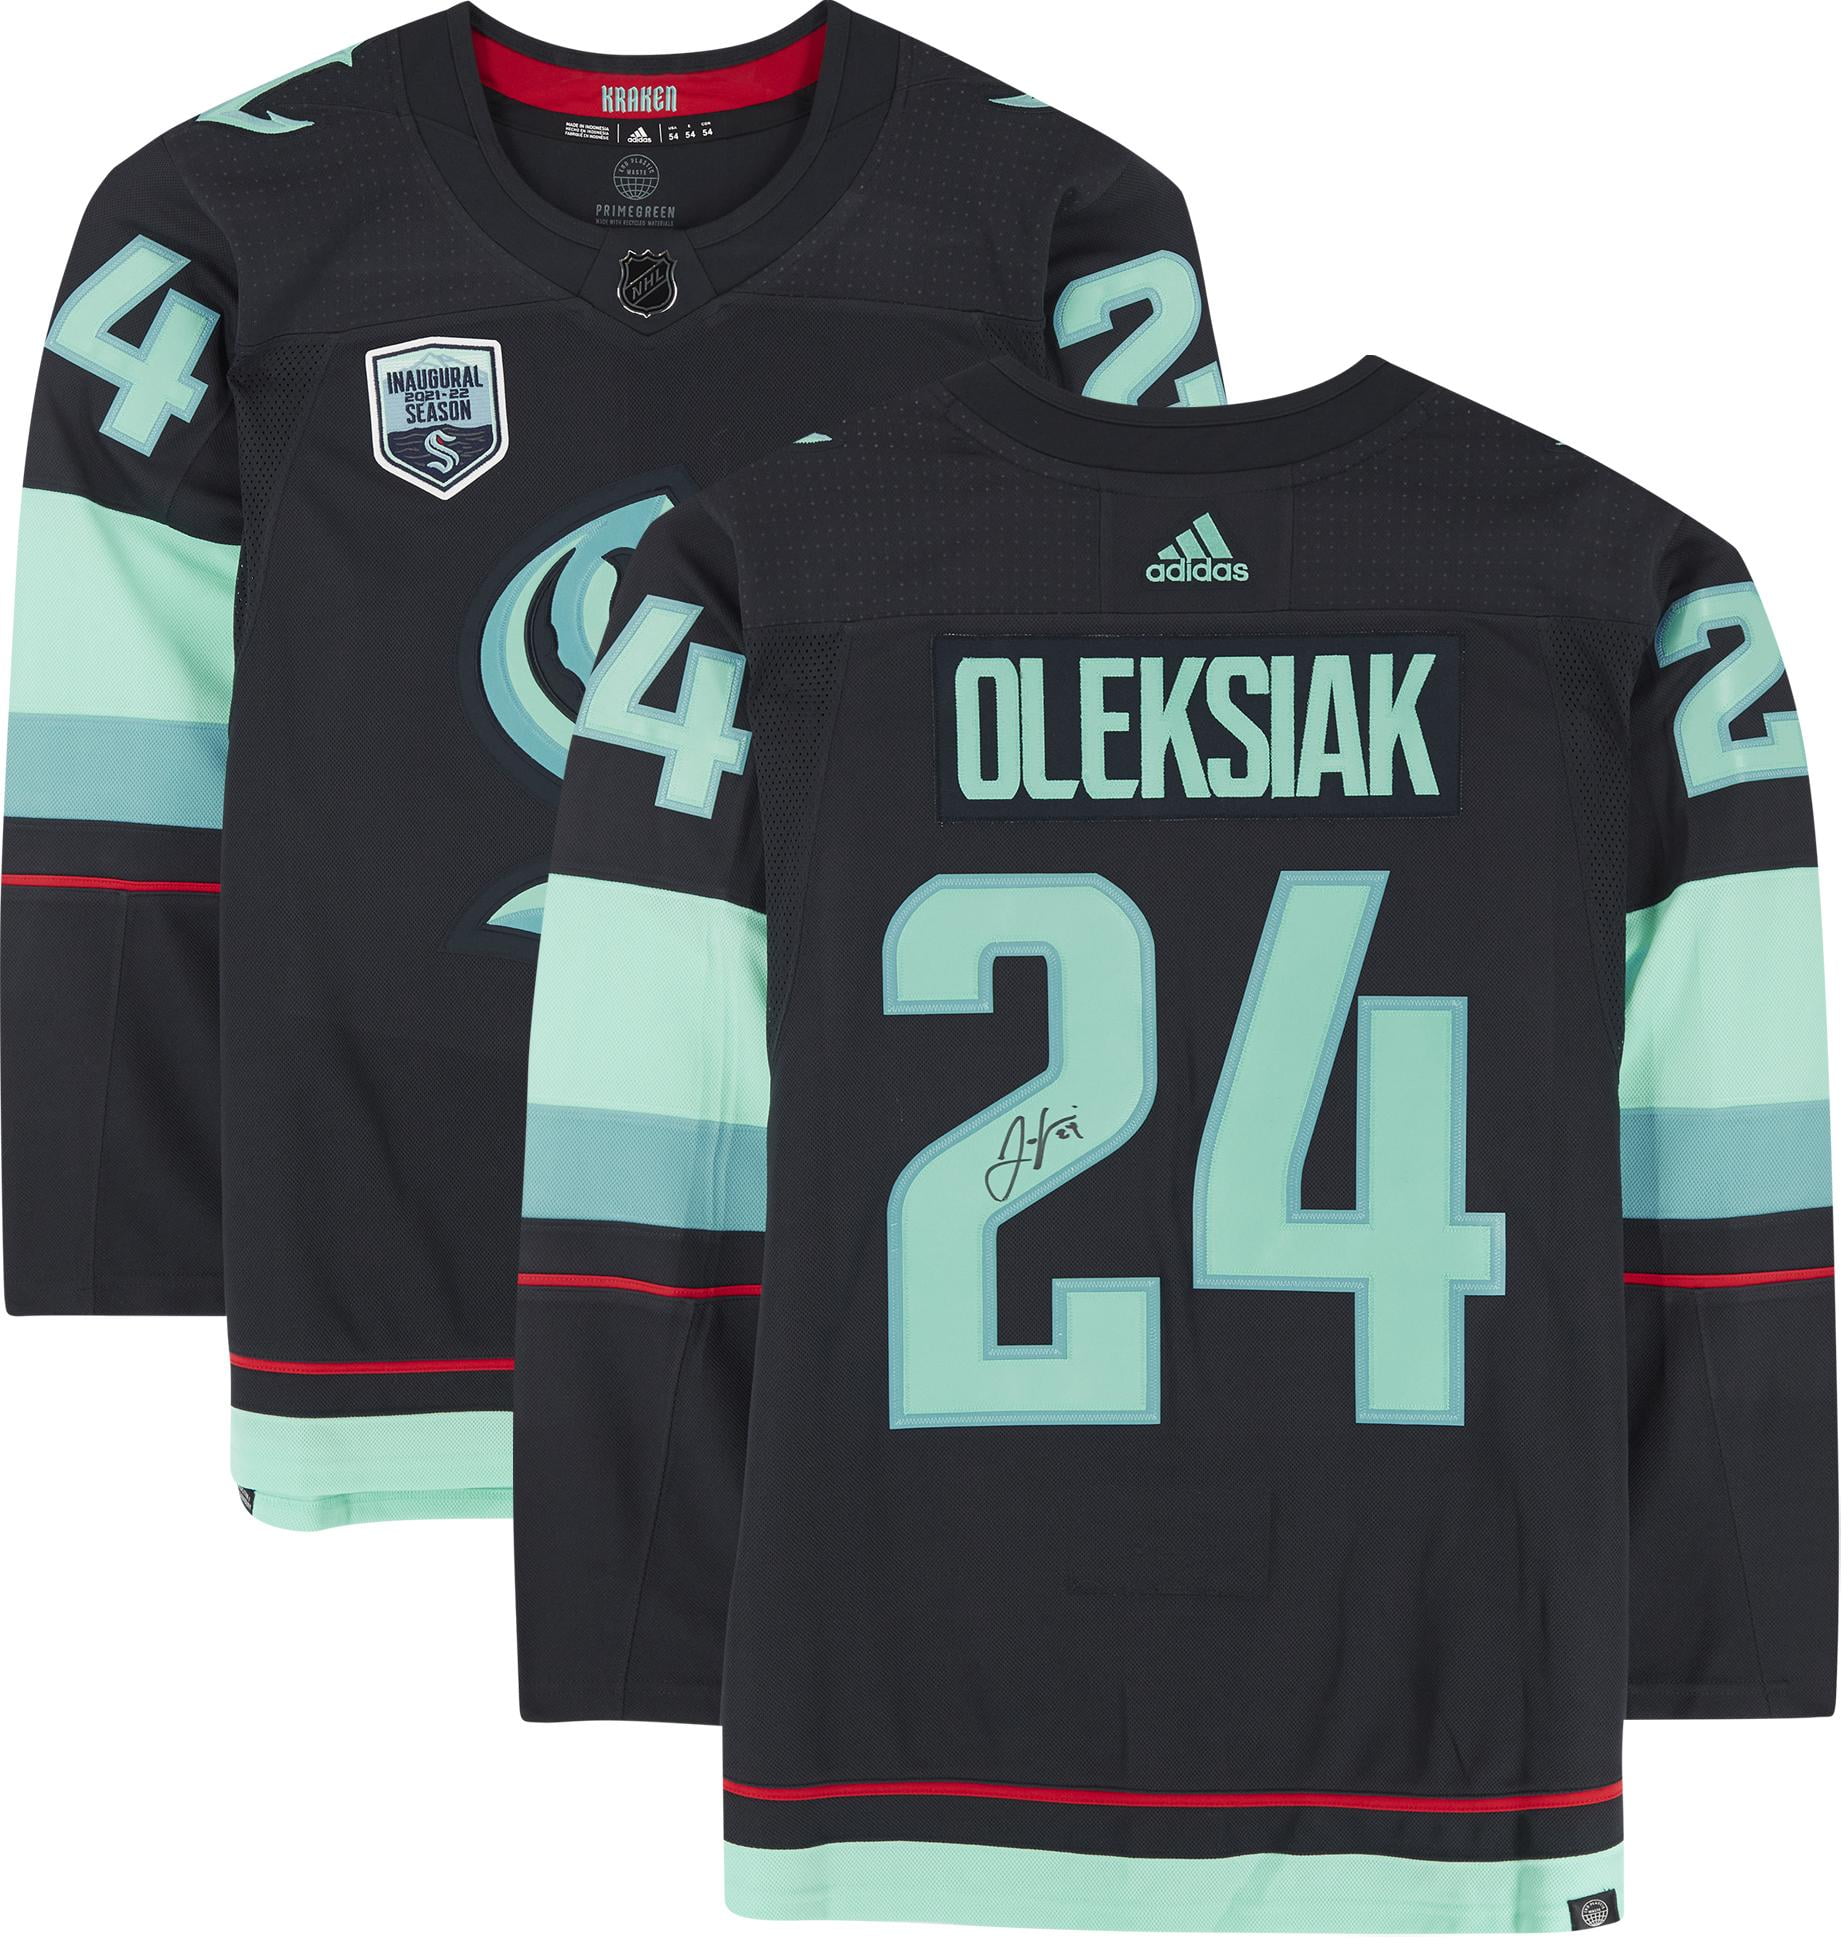 SEATTLE KRAKEN AUTHENTIC PRO ADIDAS NHL JERSEY WITH INAUGURAL